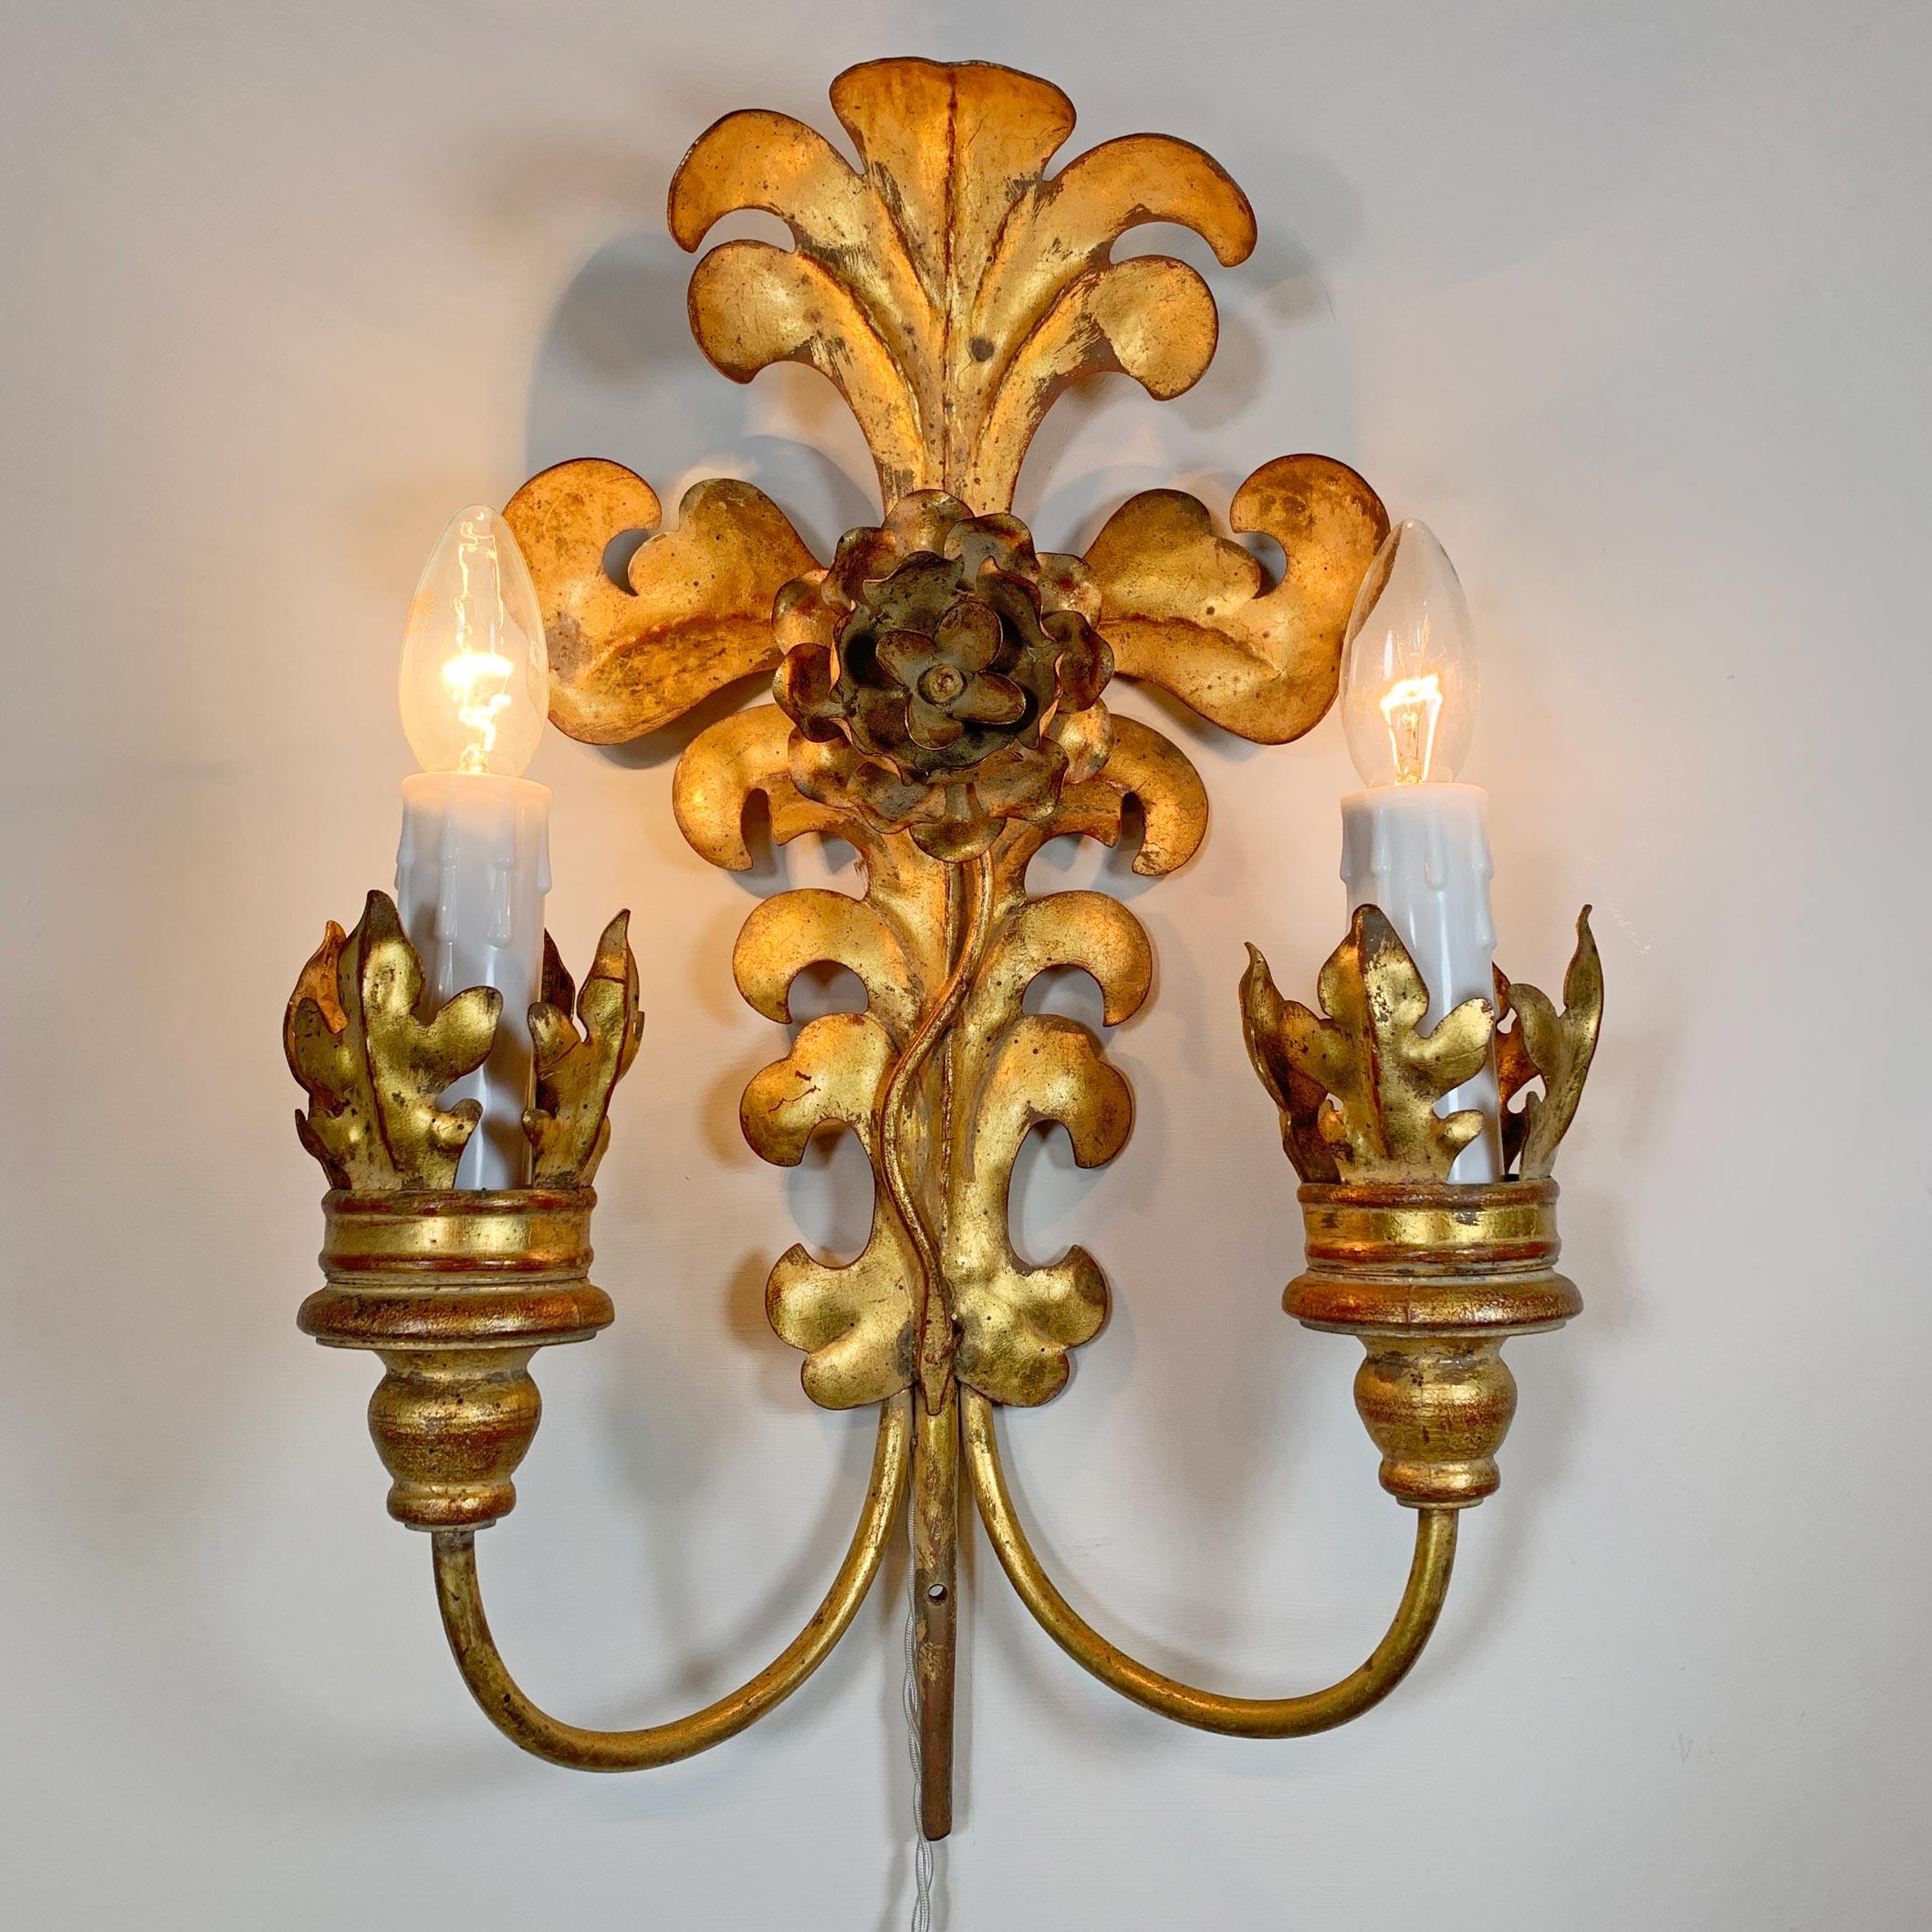 Fabulous set of 1980s Italian wall lights, in gilt metal, shaped as acanthus leaves with a floral centre. Each lamp has two e14 (small screw in) lamp holders. These are very large lights of exceptional quality, the price shown is for the set of 3